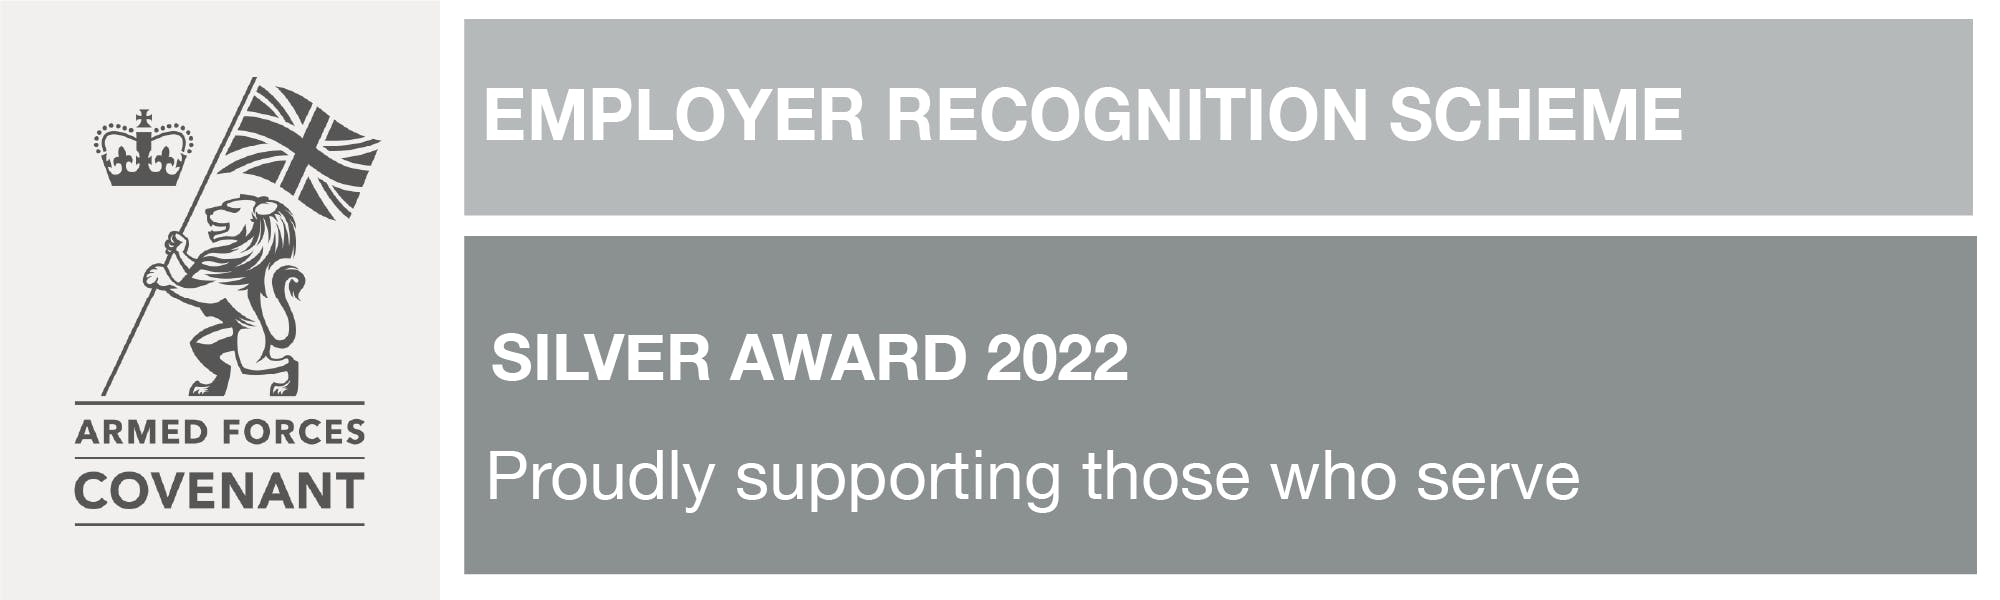 Silver Award by the Armed Forces Covenant Employer Recognition Scheme.